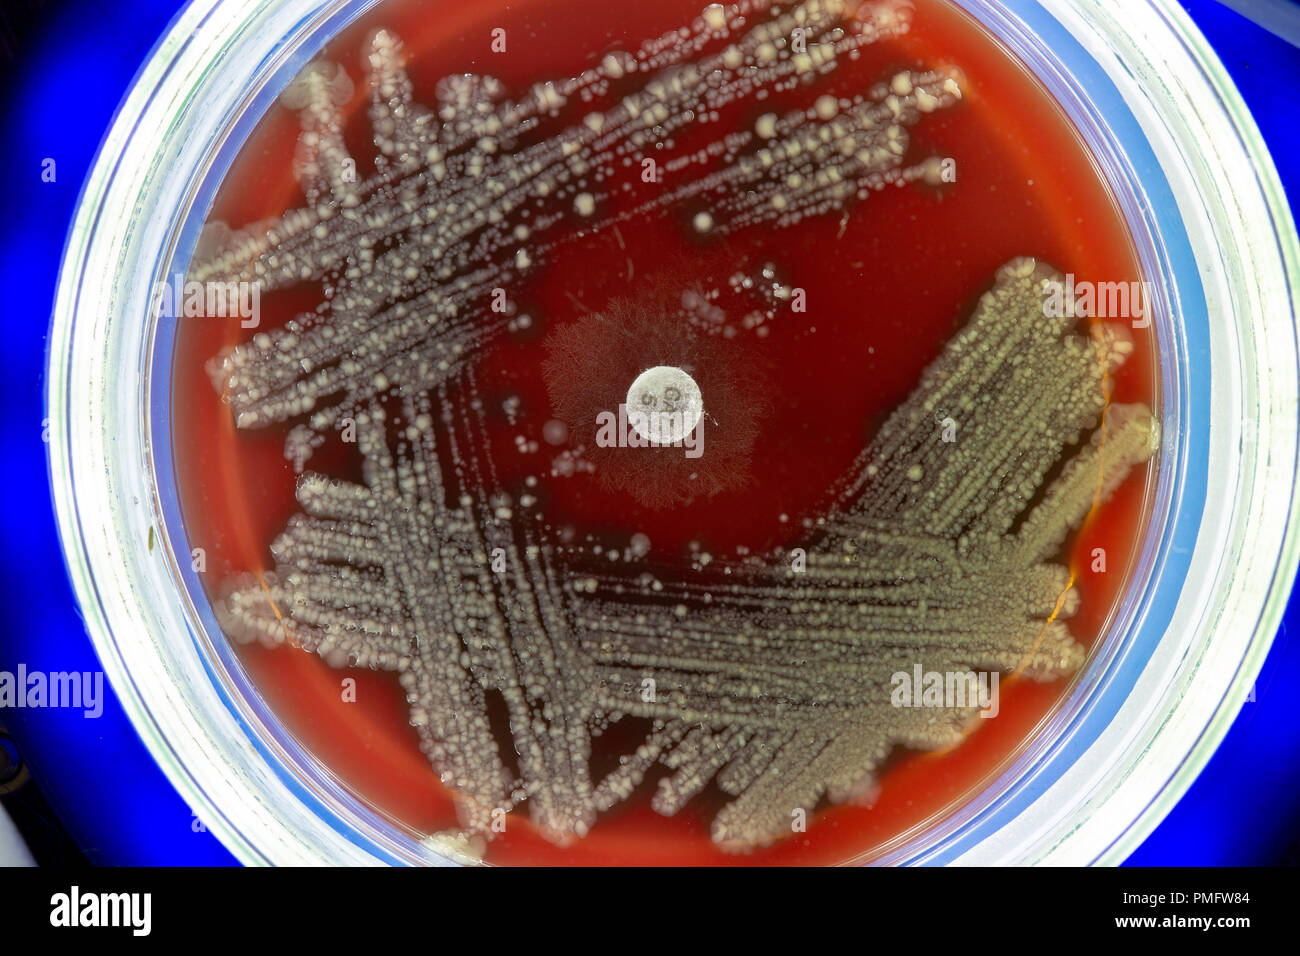 Petri dish with colonies of microbes Stock Photo